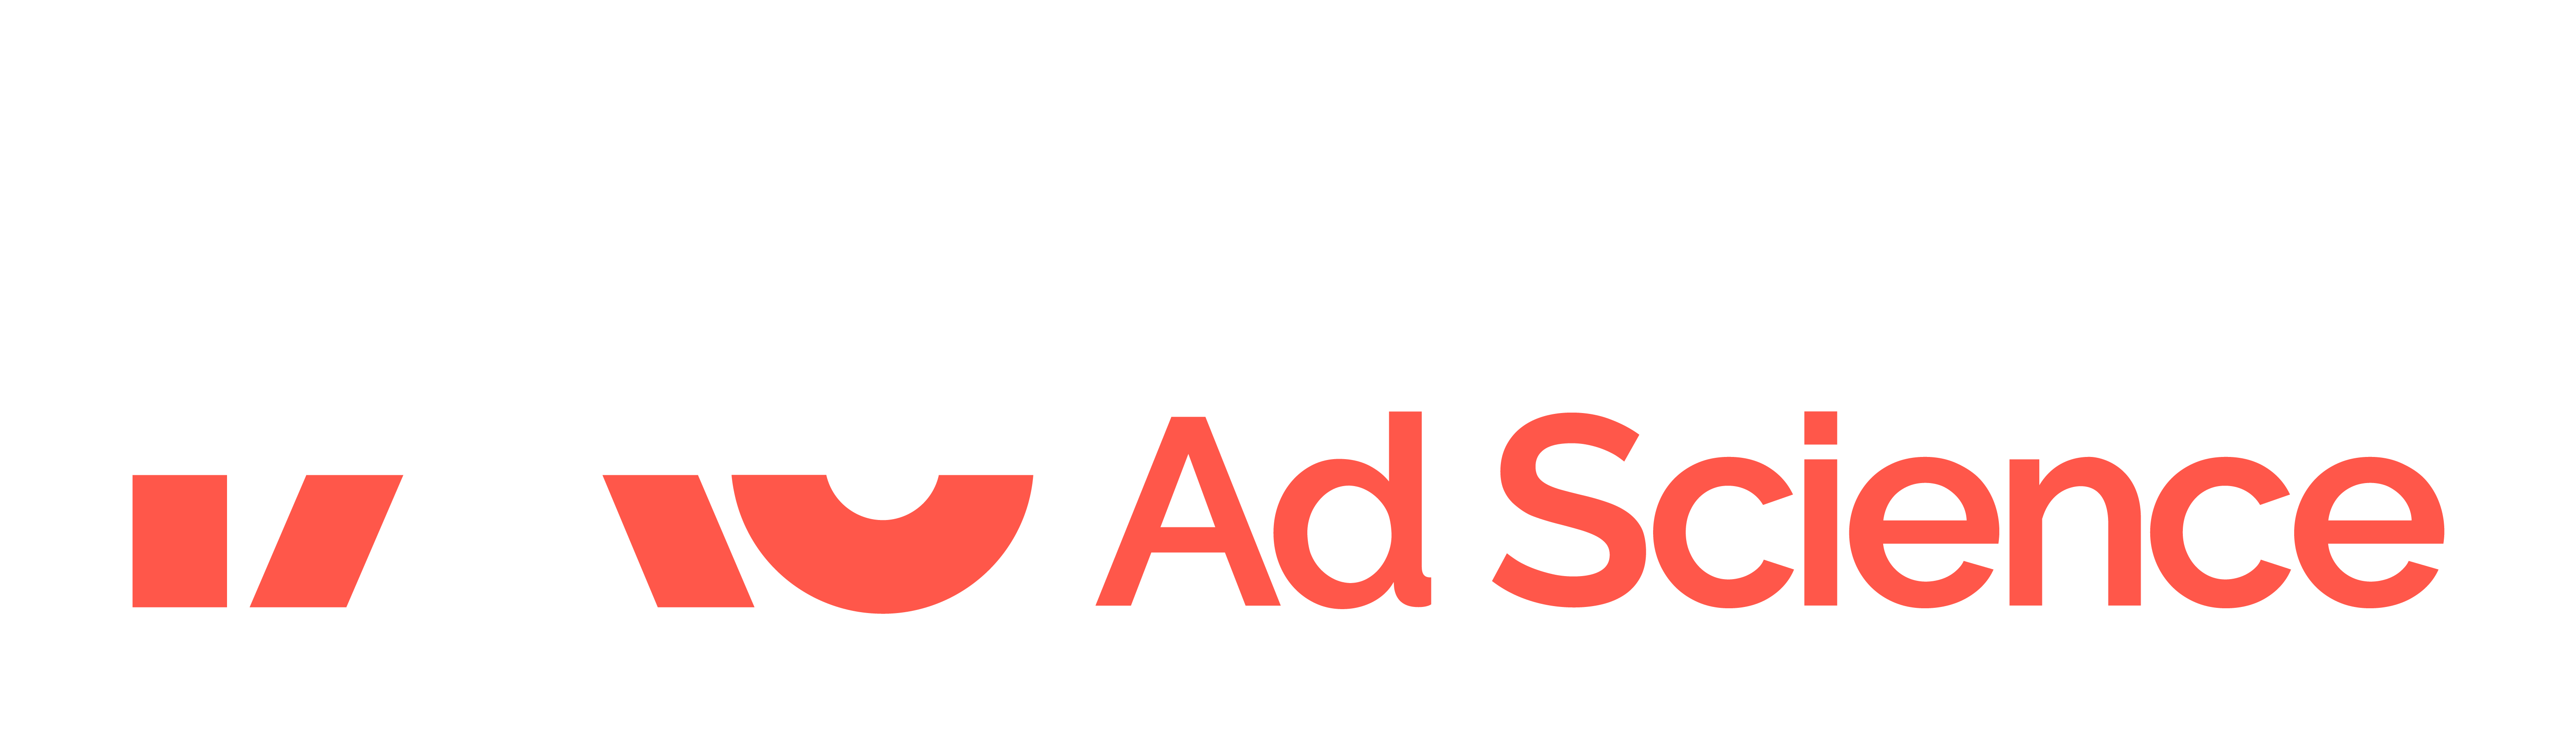 red and white Integral Ad Science logo